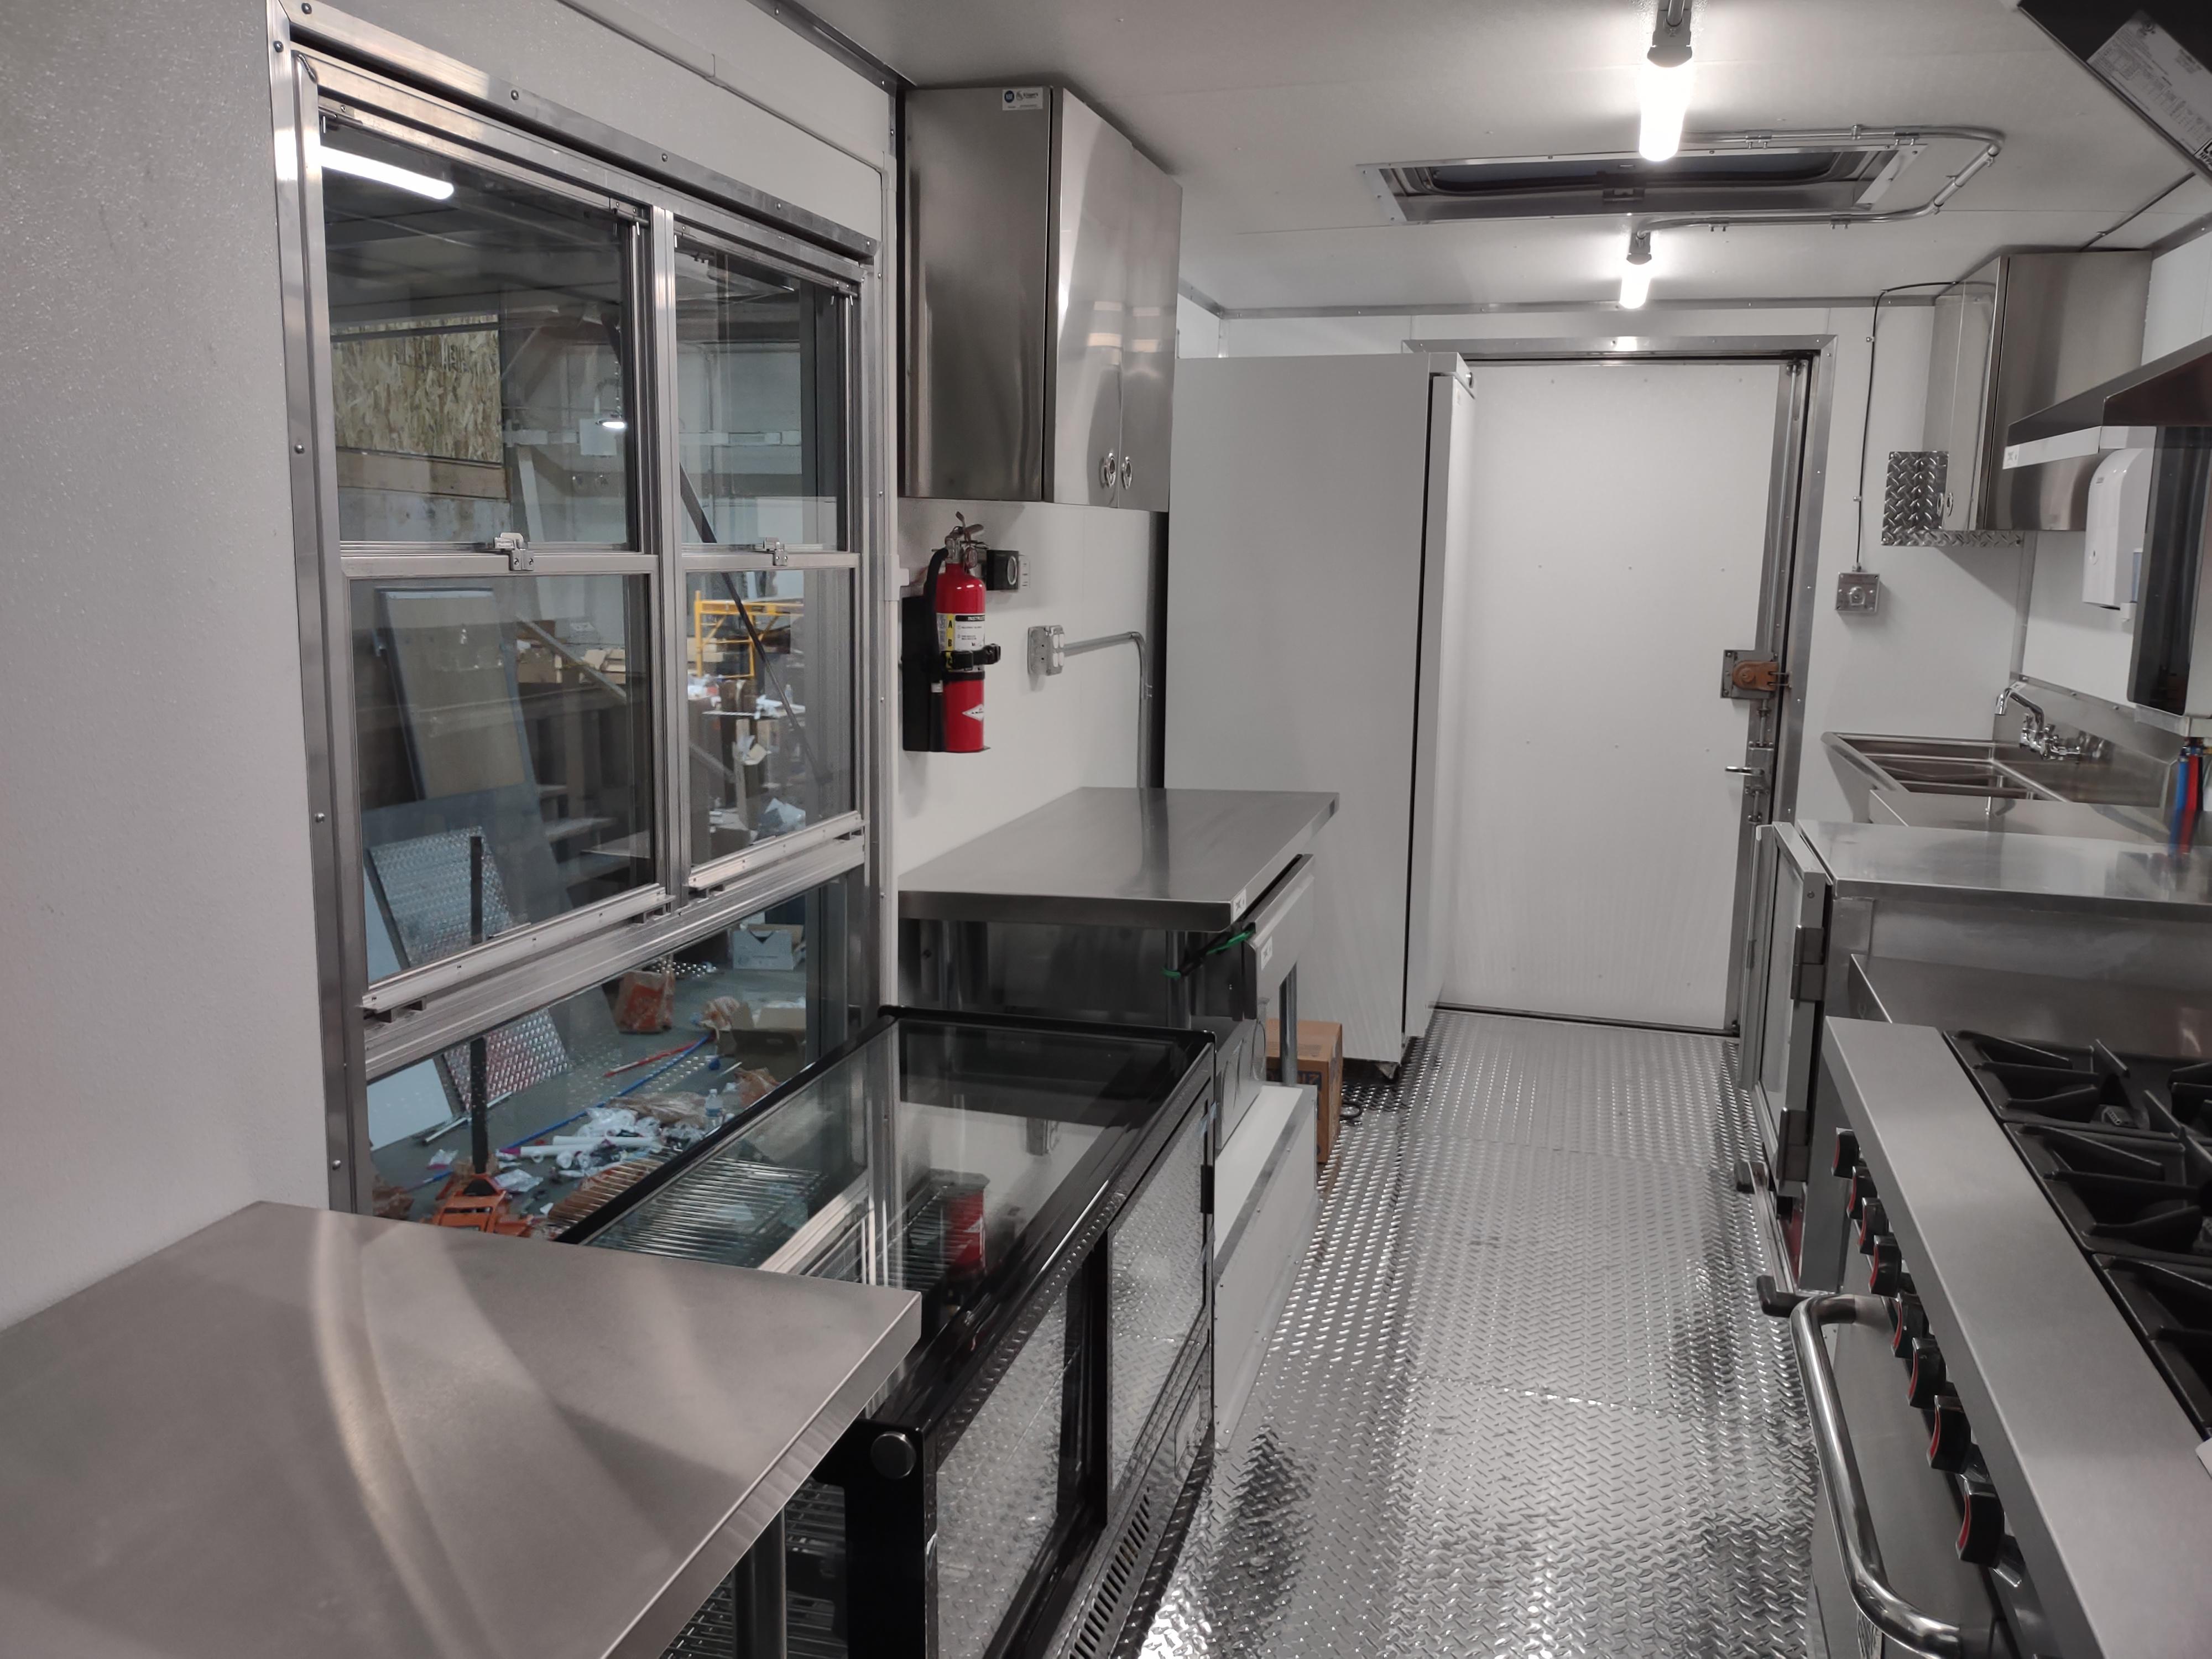 Mobile Kitchen Fabrication in Denver, CO, believes that top-quality fabrication shouldn't break the bank. Our Affordable Mobile Kitchen Fabrication services ensure that you receive exceptional value without compromising on the construction and functionality of your mobile kitchen.